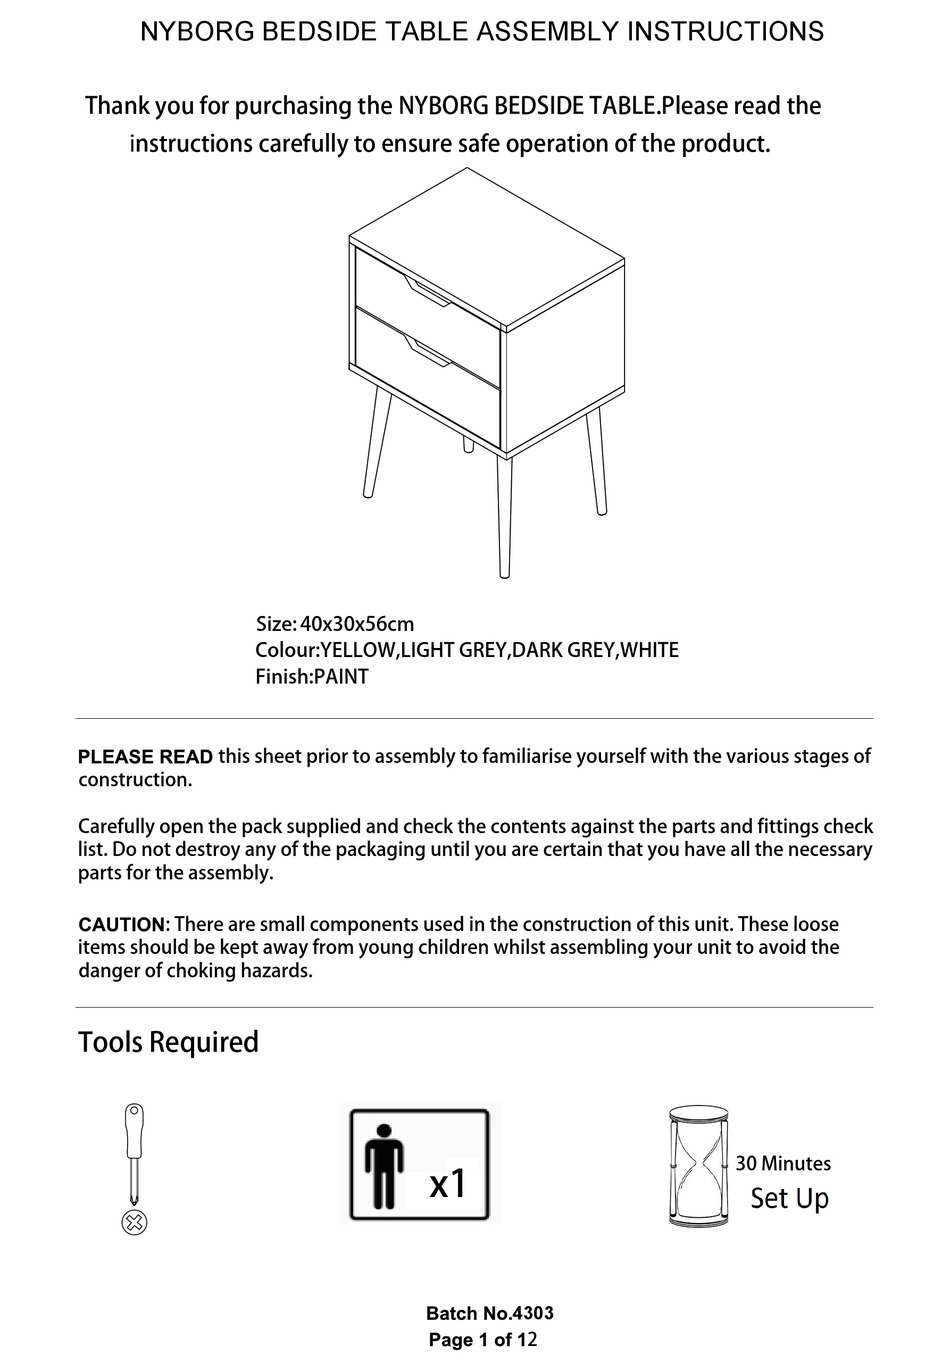 NYBORG BEDSIDE TABLE ASSEMBLY INSTRUCTIONS MANUAL Pdf Download 